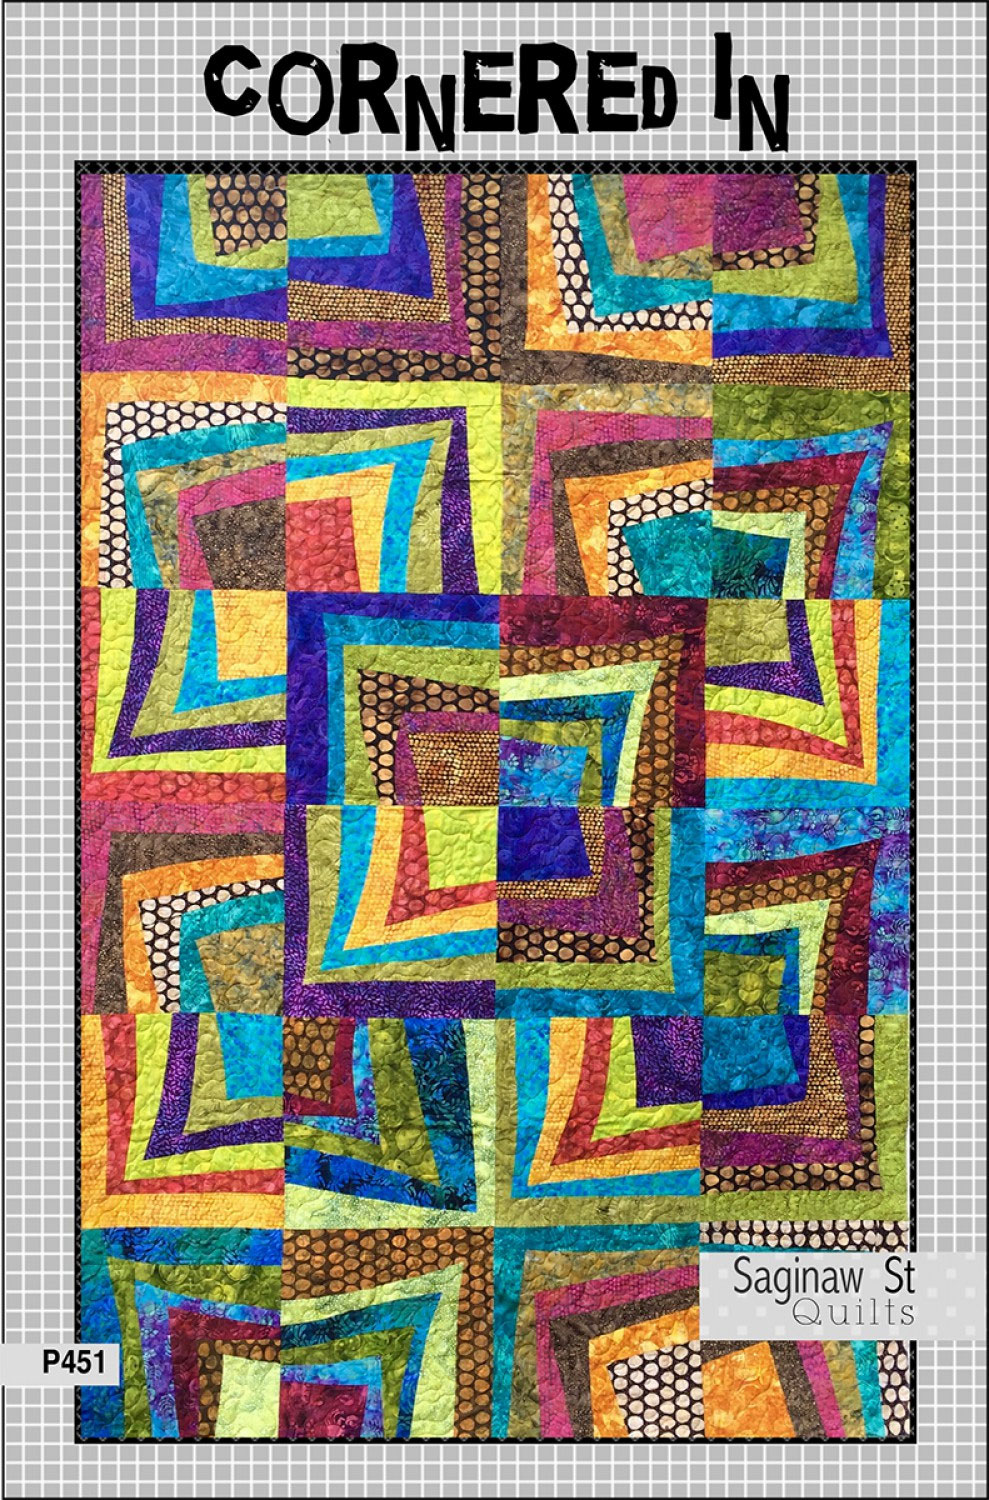 Cornered-In-quilt-sewing-pattern-Saginaw-st-quilts-front